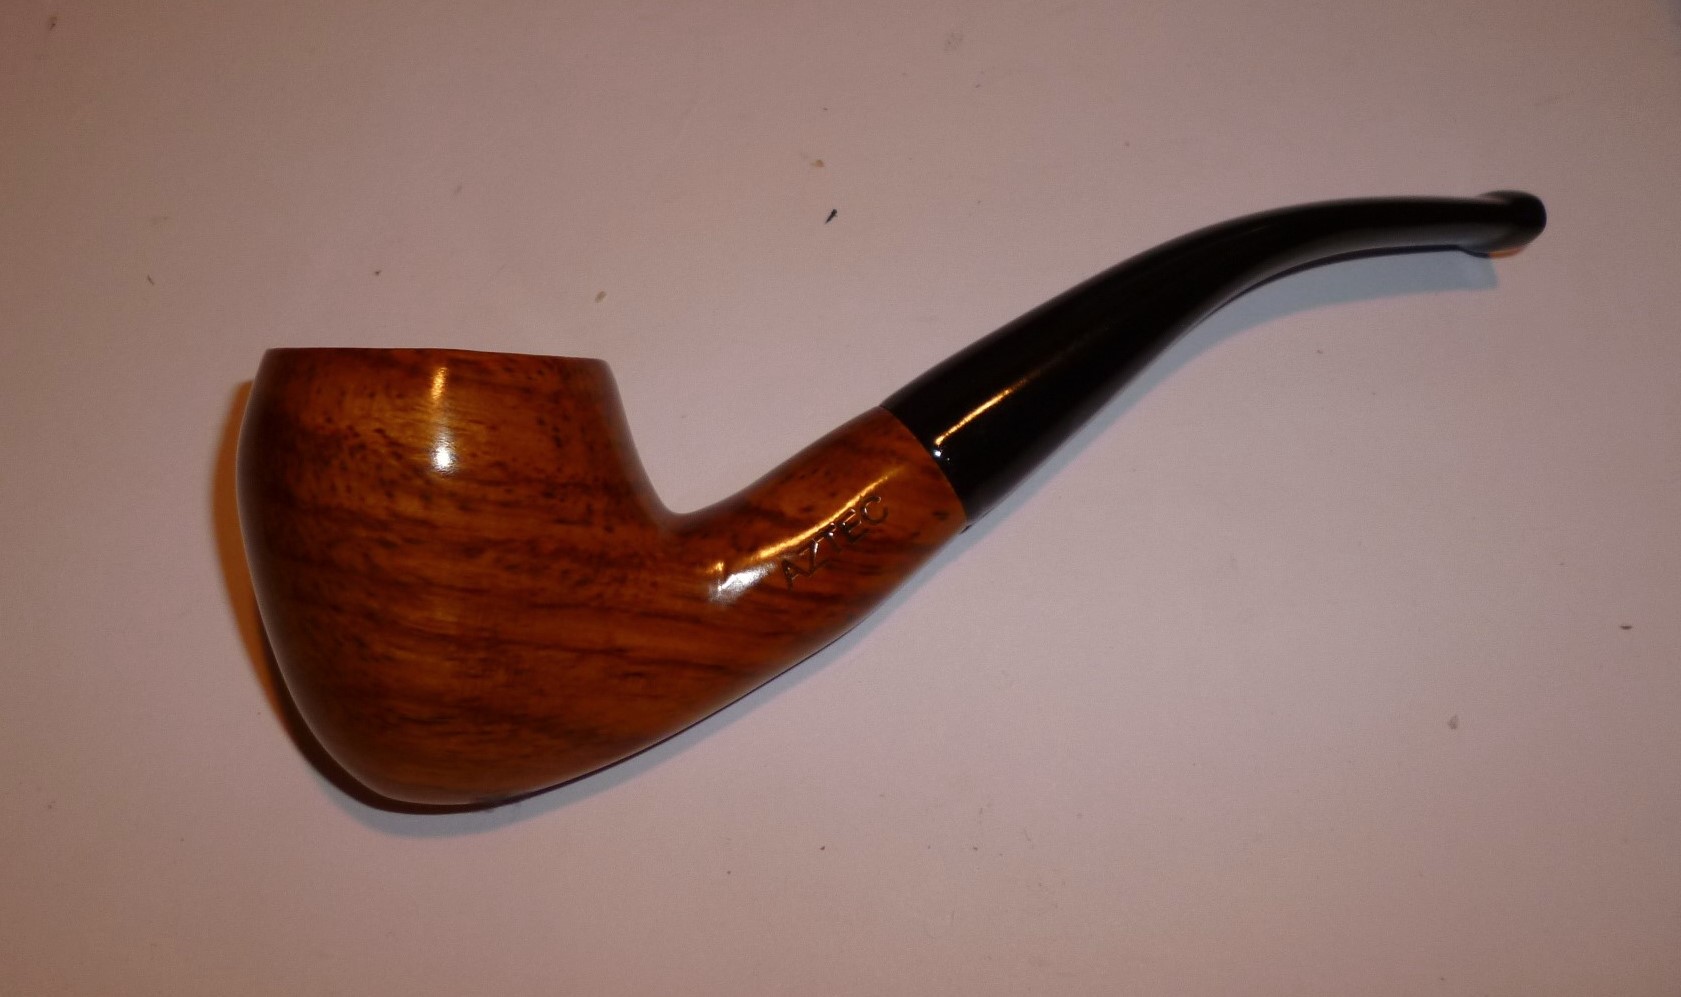 Aztec Pipes Straight and Bent - # 5 Bent Stem with Bent Tapered Mouthpiece